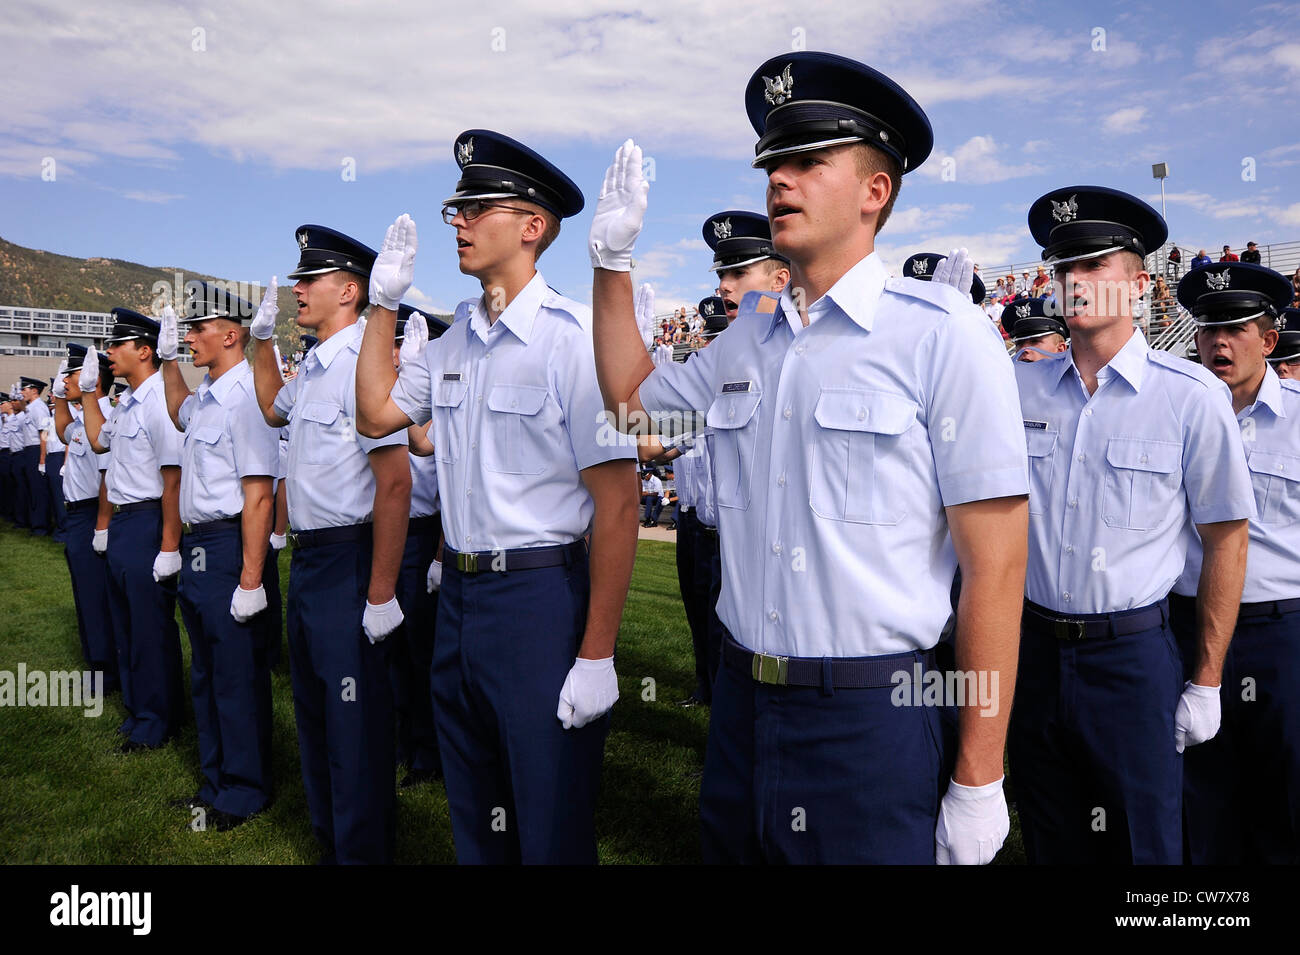 Basic cadet Nathaniel Heldreth recites the Honor Oath during the Class of 2016 Acceptance Parade on the U.S. Air Force Academy's Stillman Parade Field in Colorado Springs, Colo. Aug 7, 2012. During Acceptance, the new freshmen march toward the Cadet Wing in an inverse wedge formation to signify their entrance into the Cadet Wing. Stock Photo